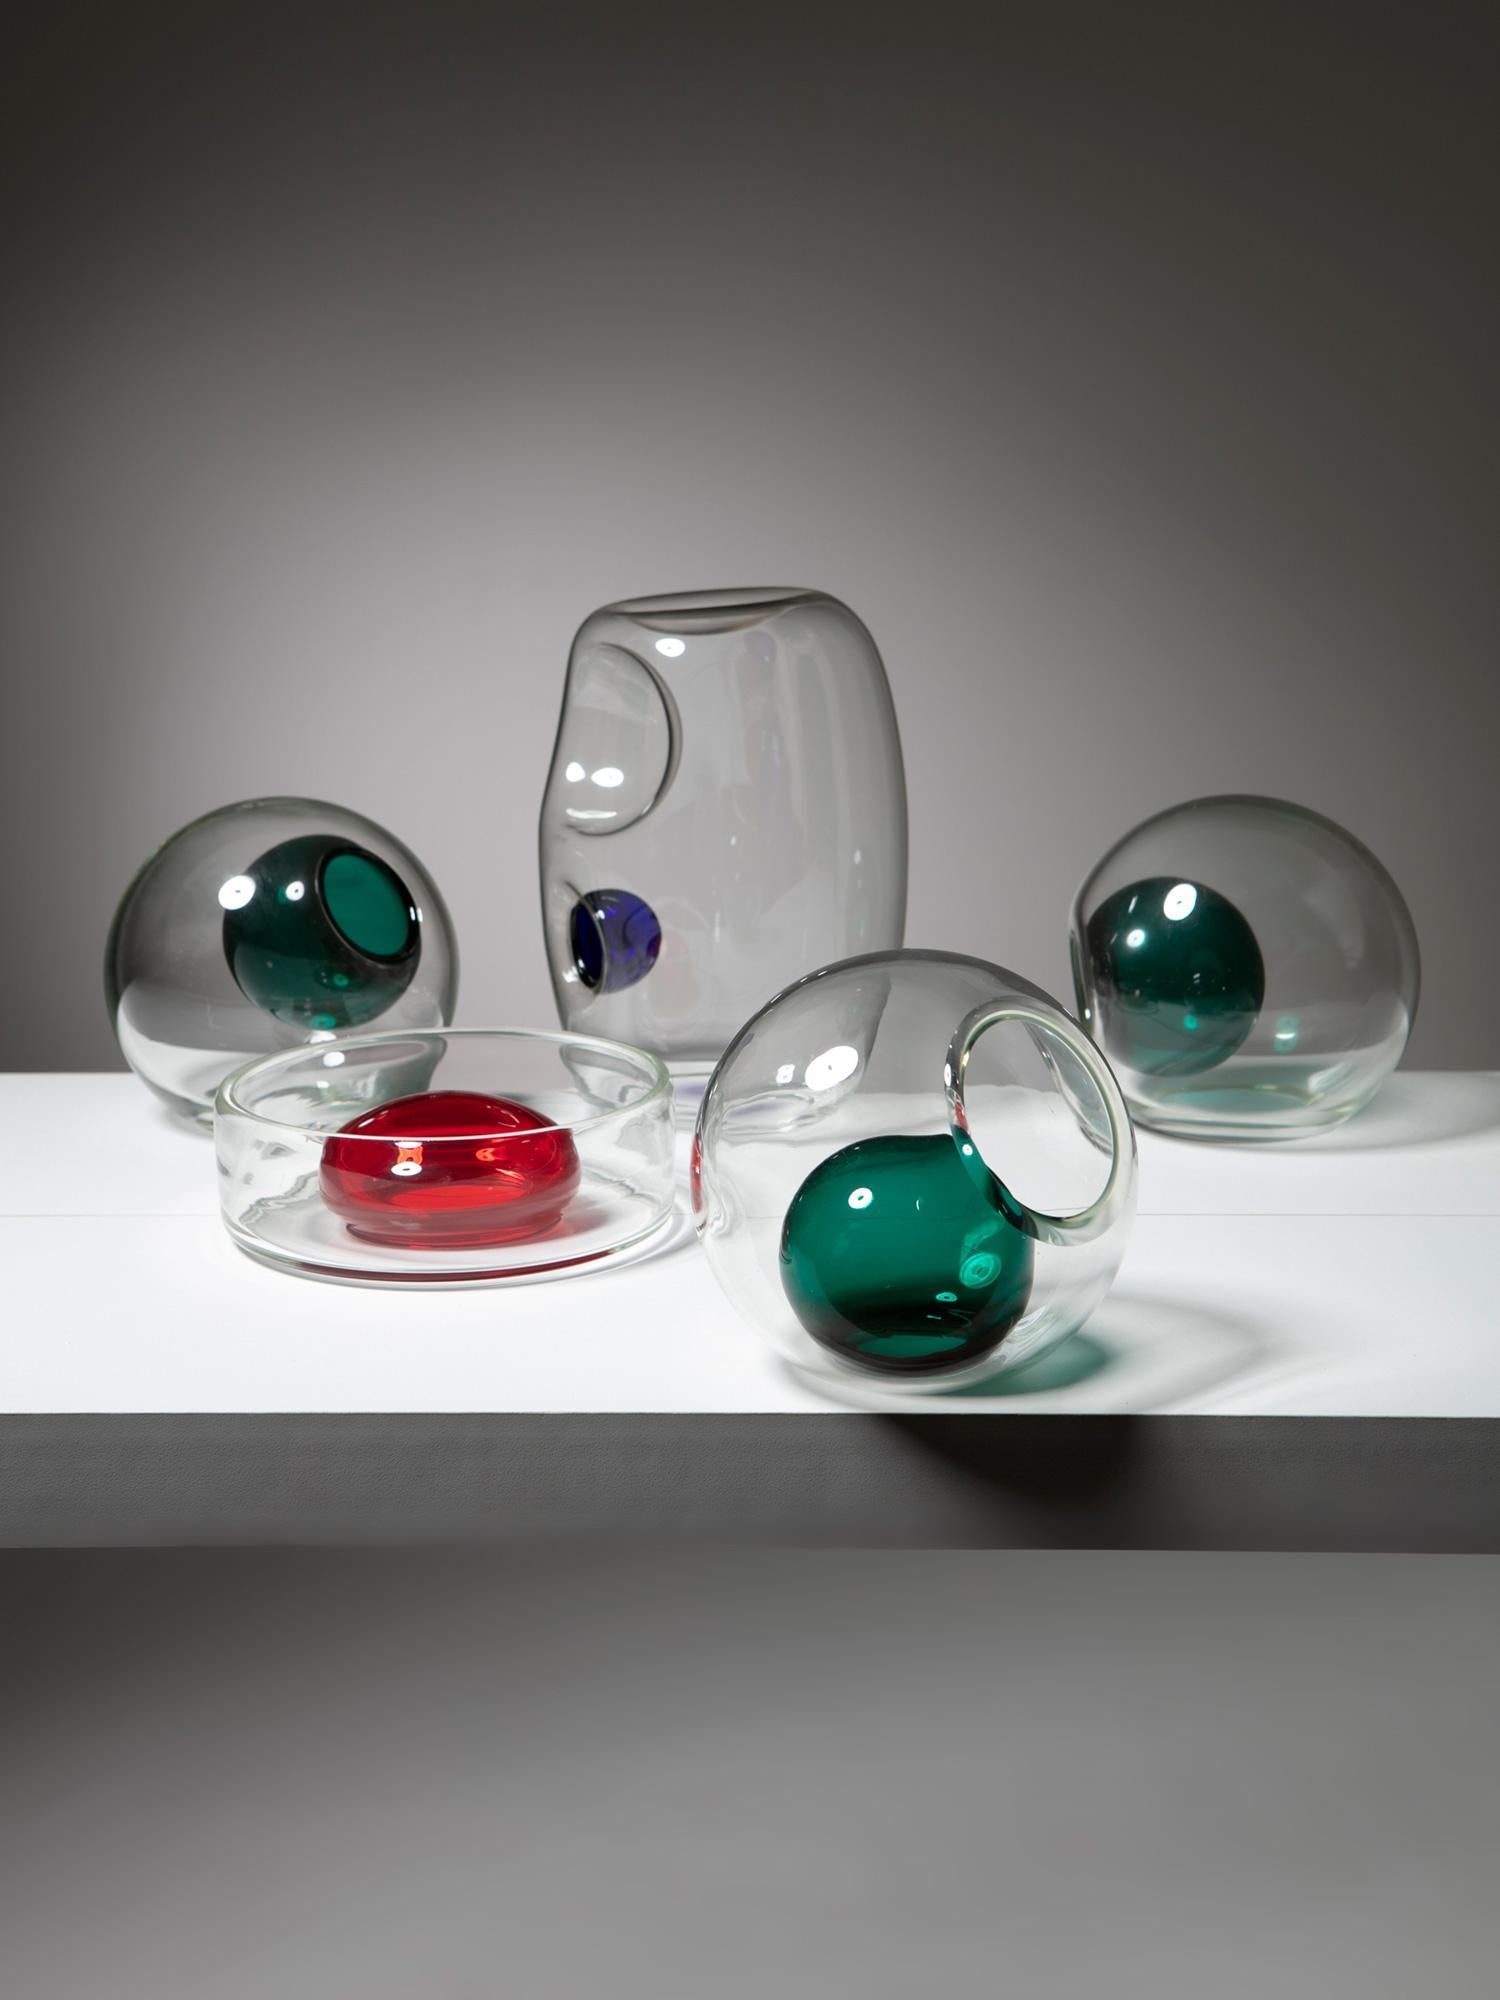 Rare set of glass centerpieces by Vistosi.
Different shape and glass color elements joined together with incalmo technique.
Size refers to the biggest piece.